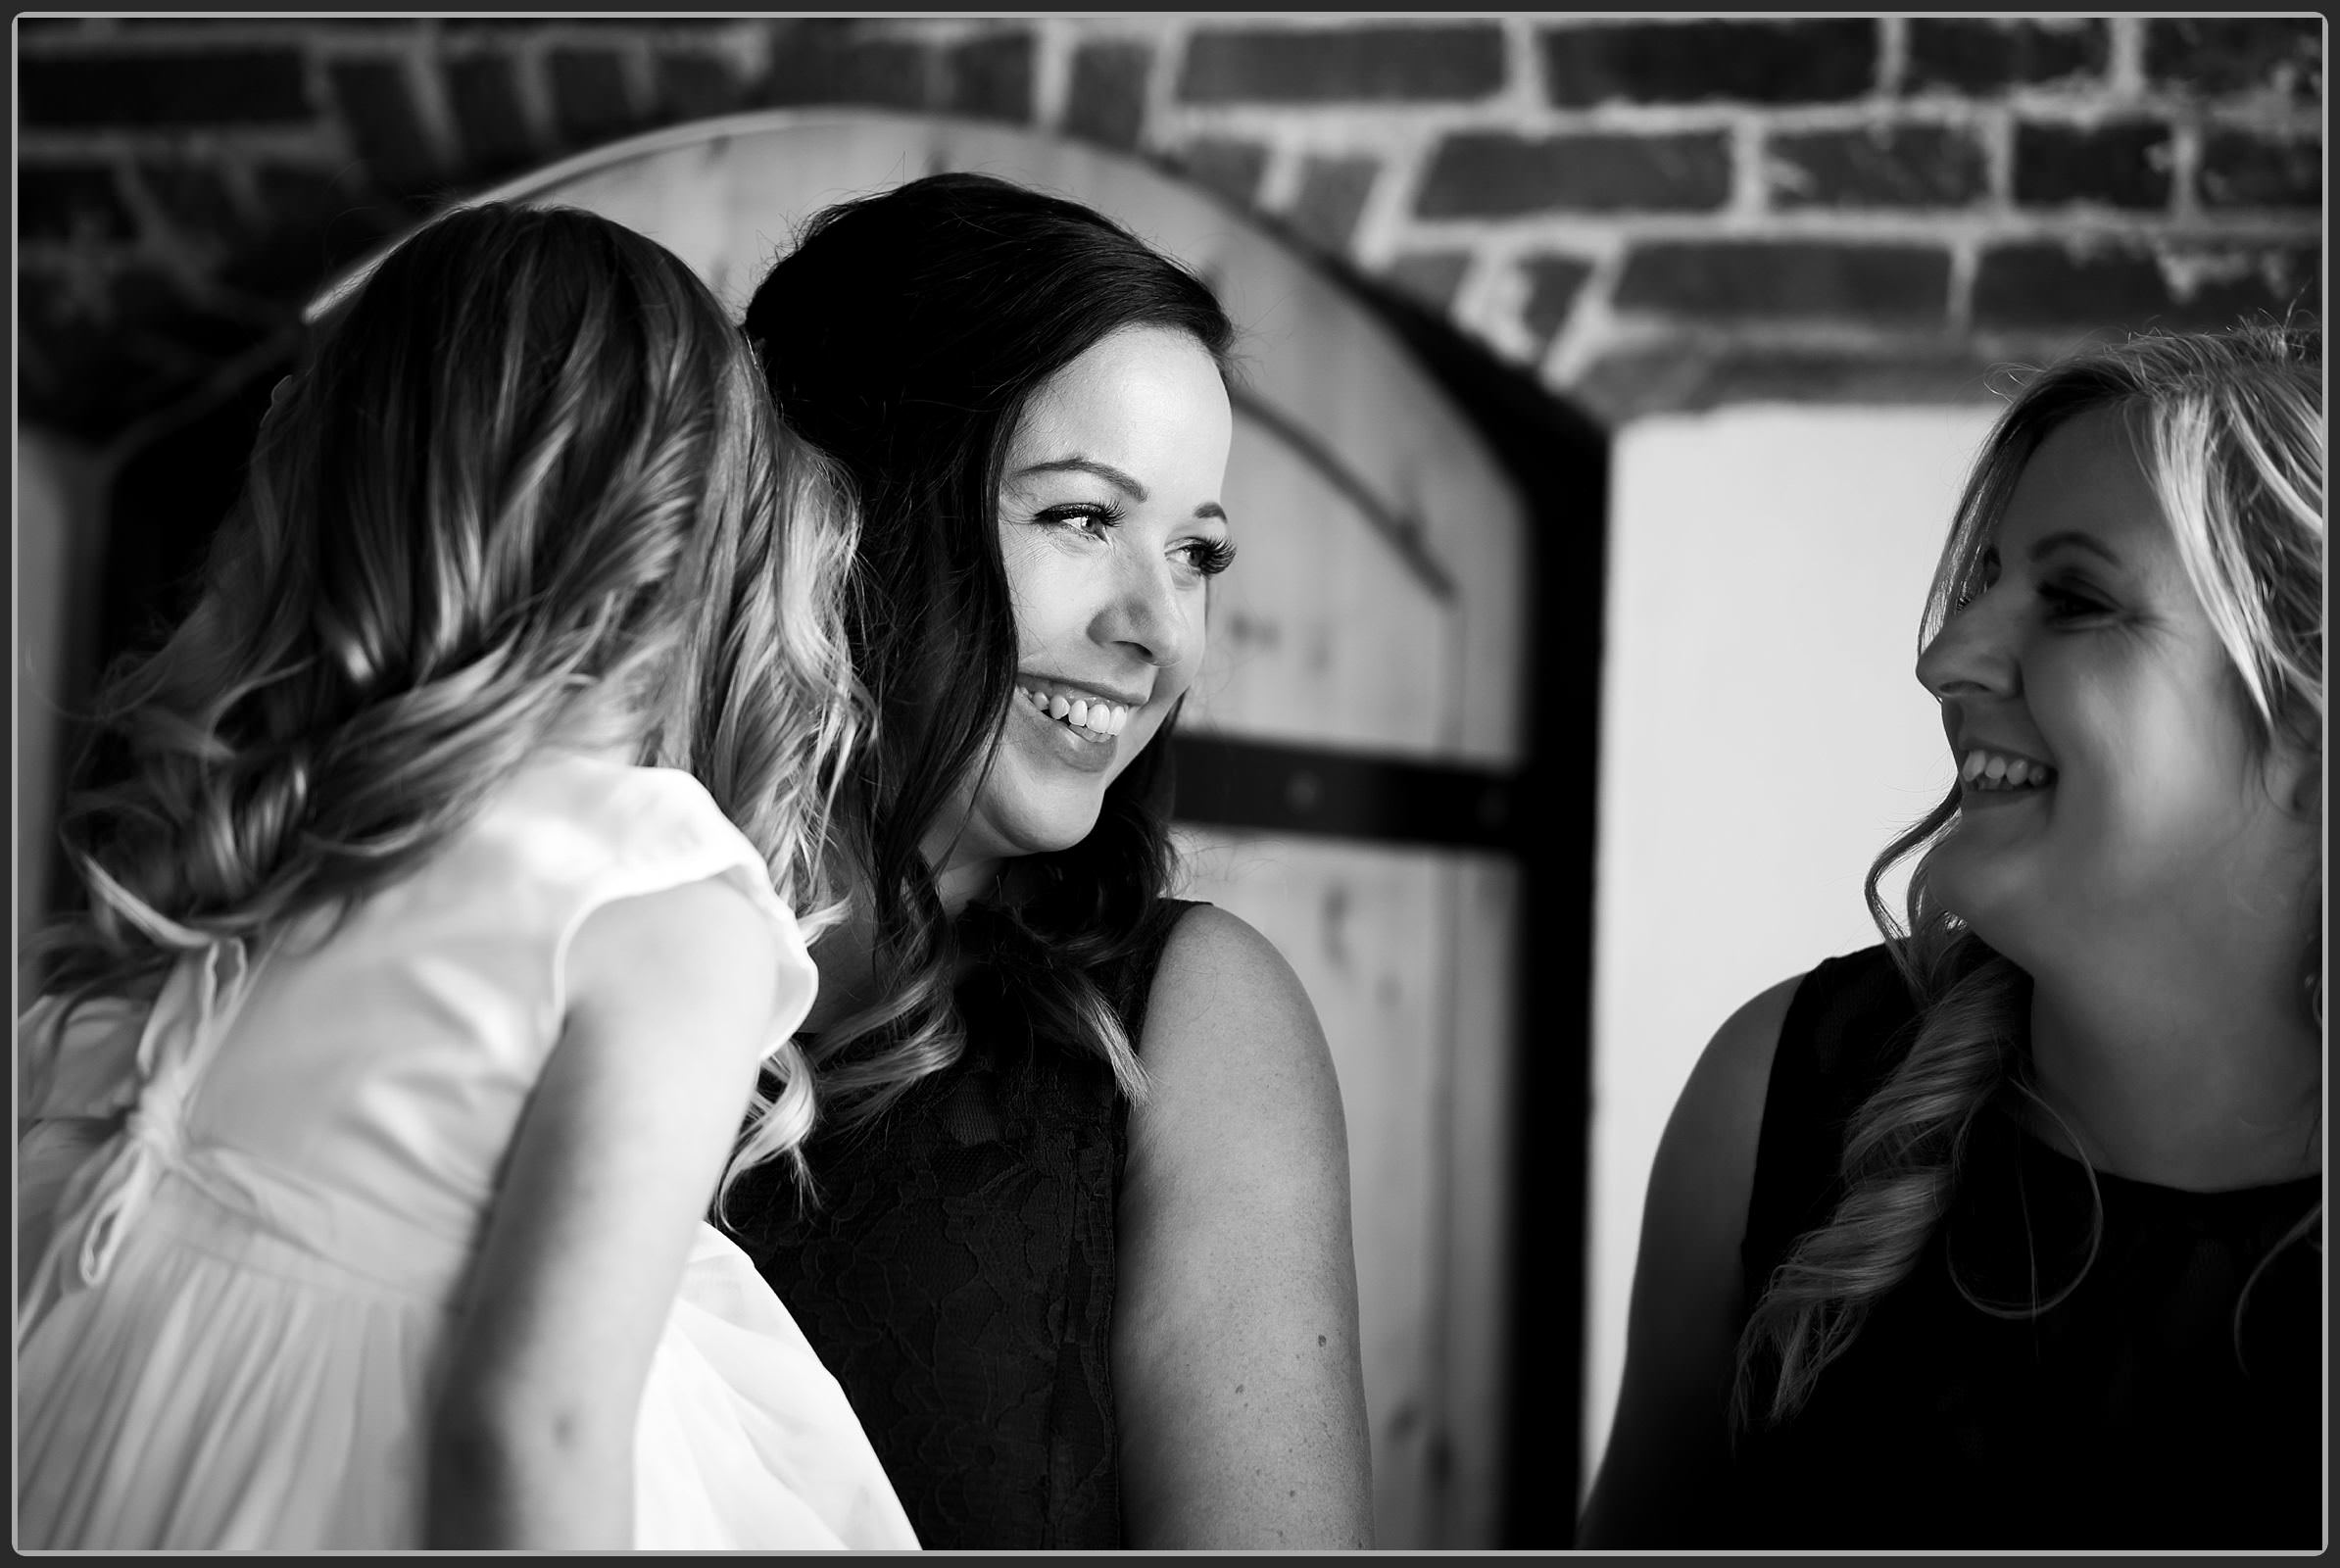 The bridesmaids laughing